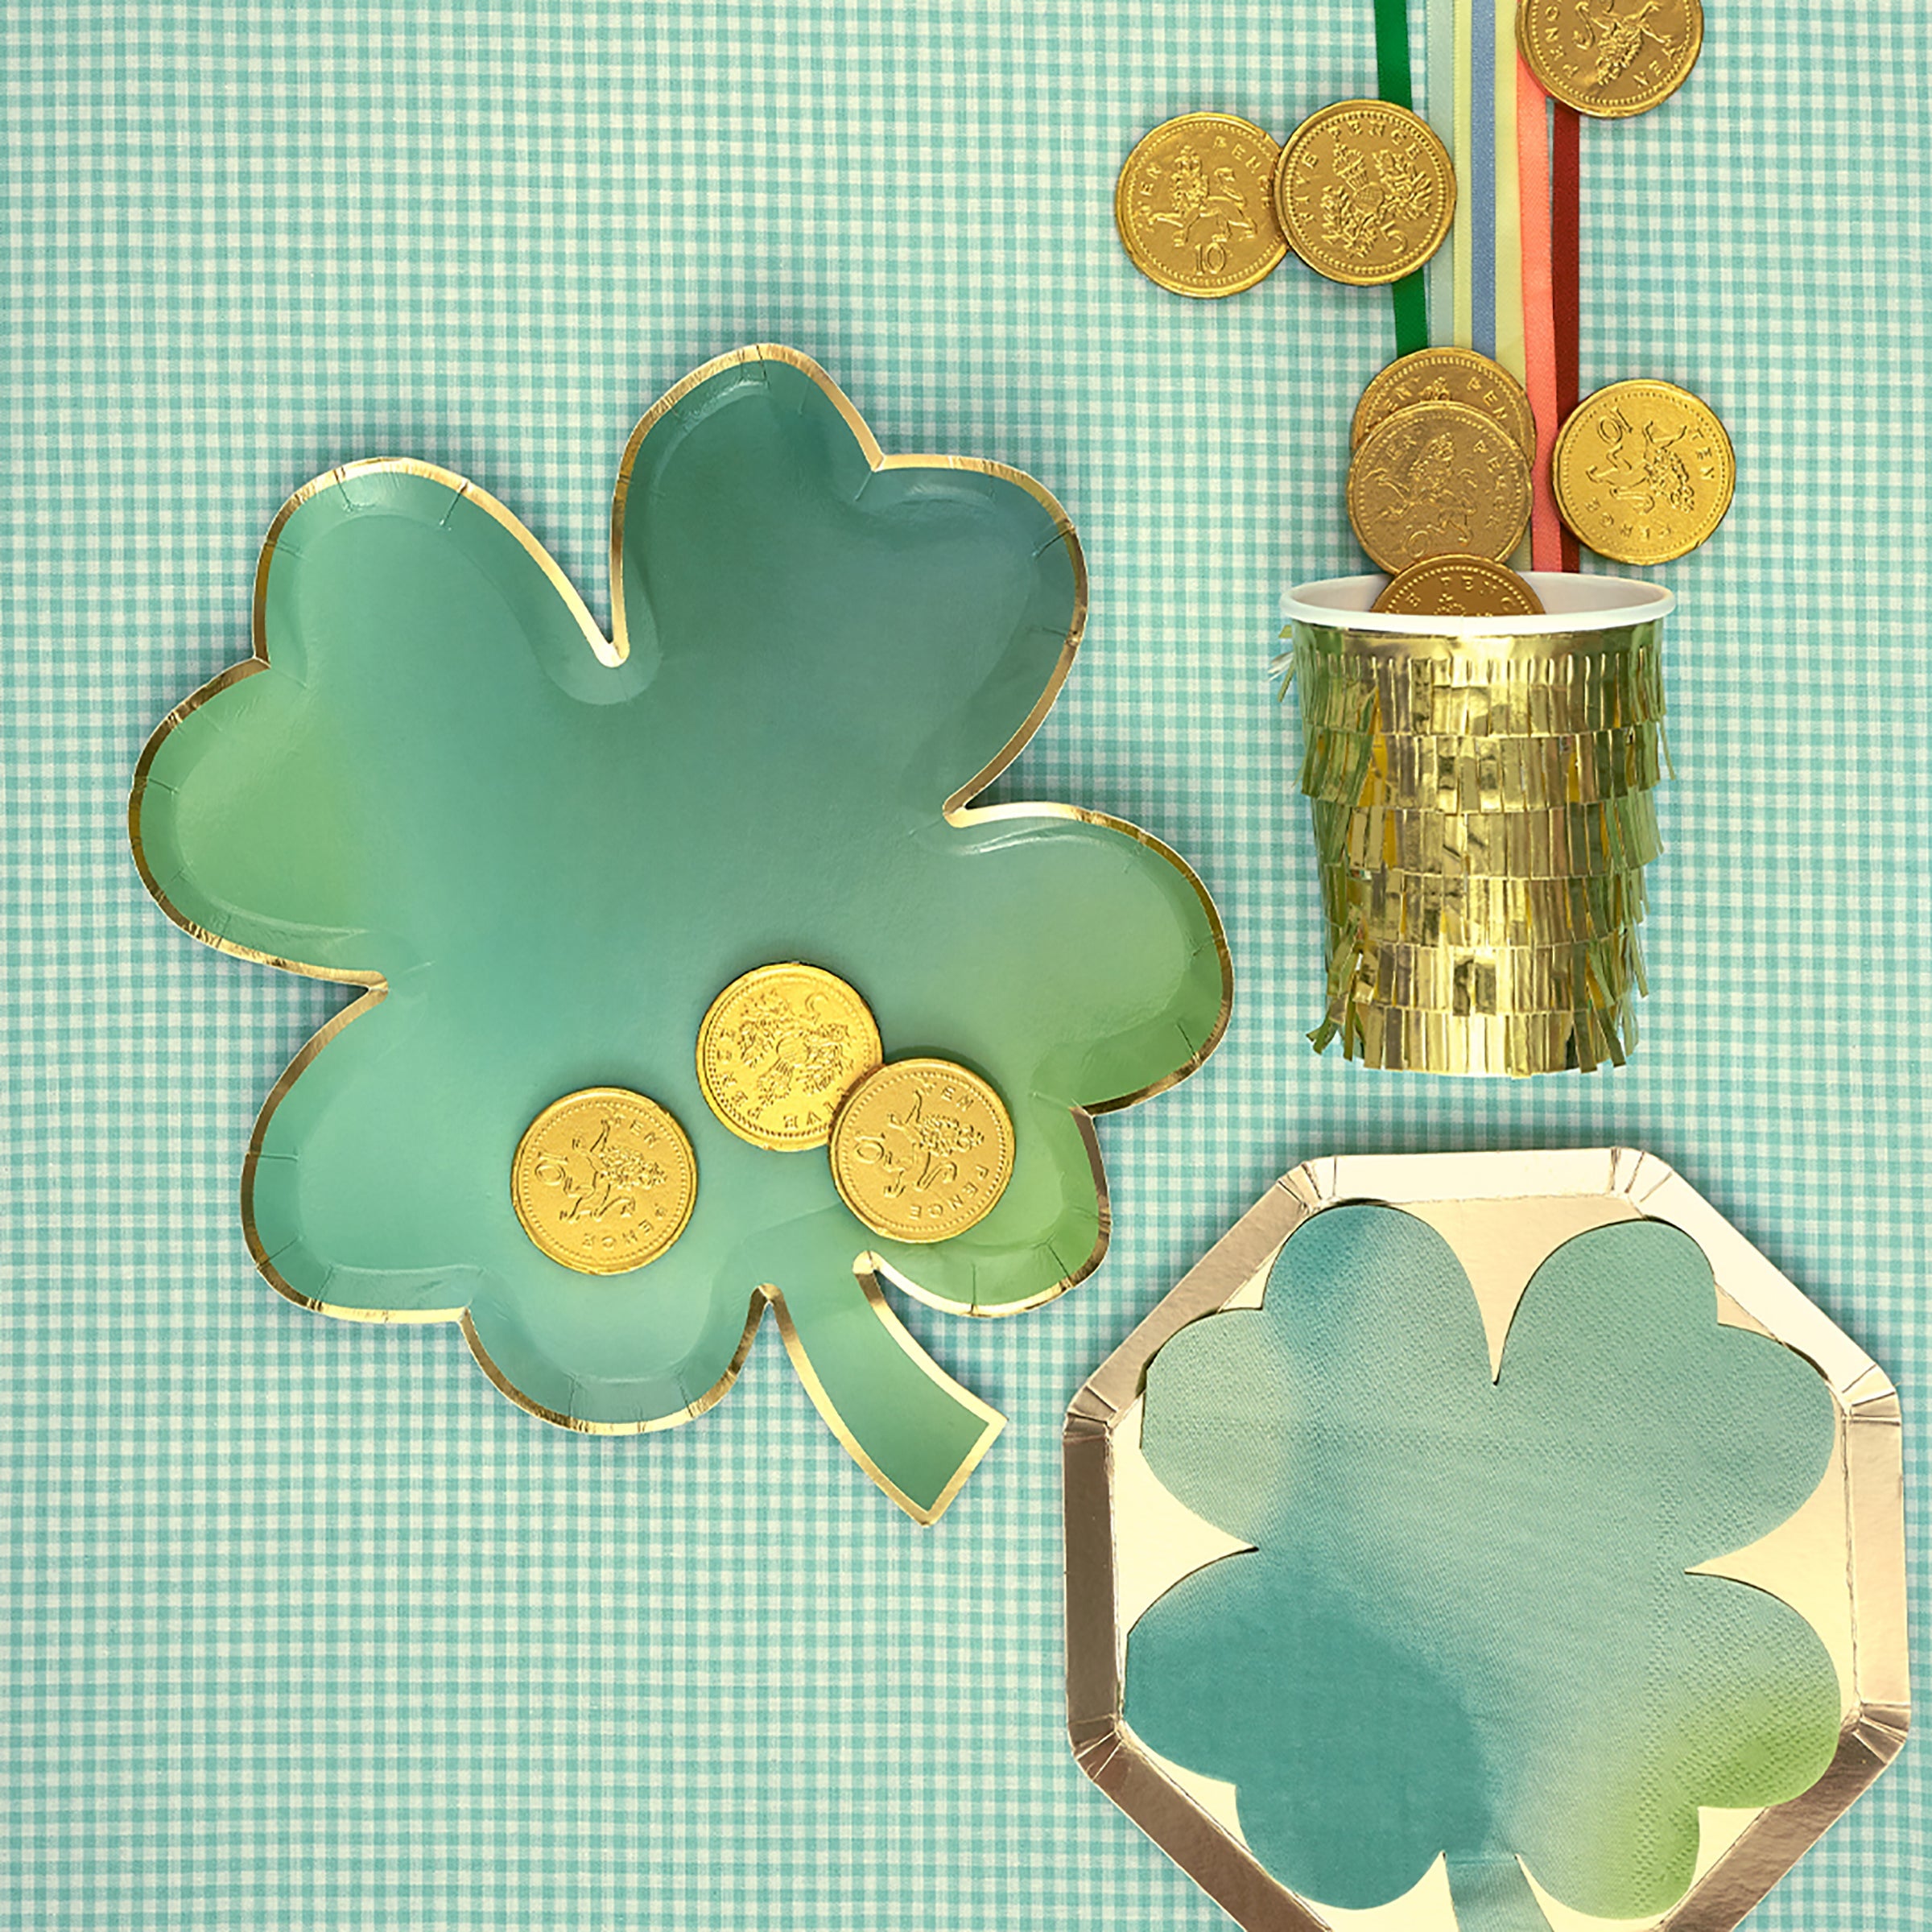 Our four leaf clover plates are perfect for a St Patricks Day celebration.